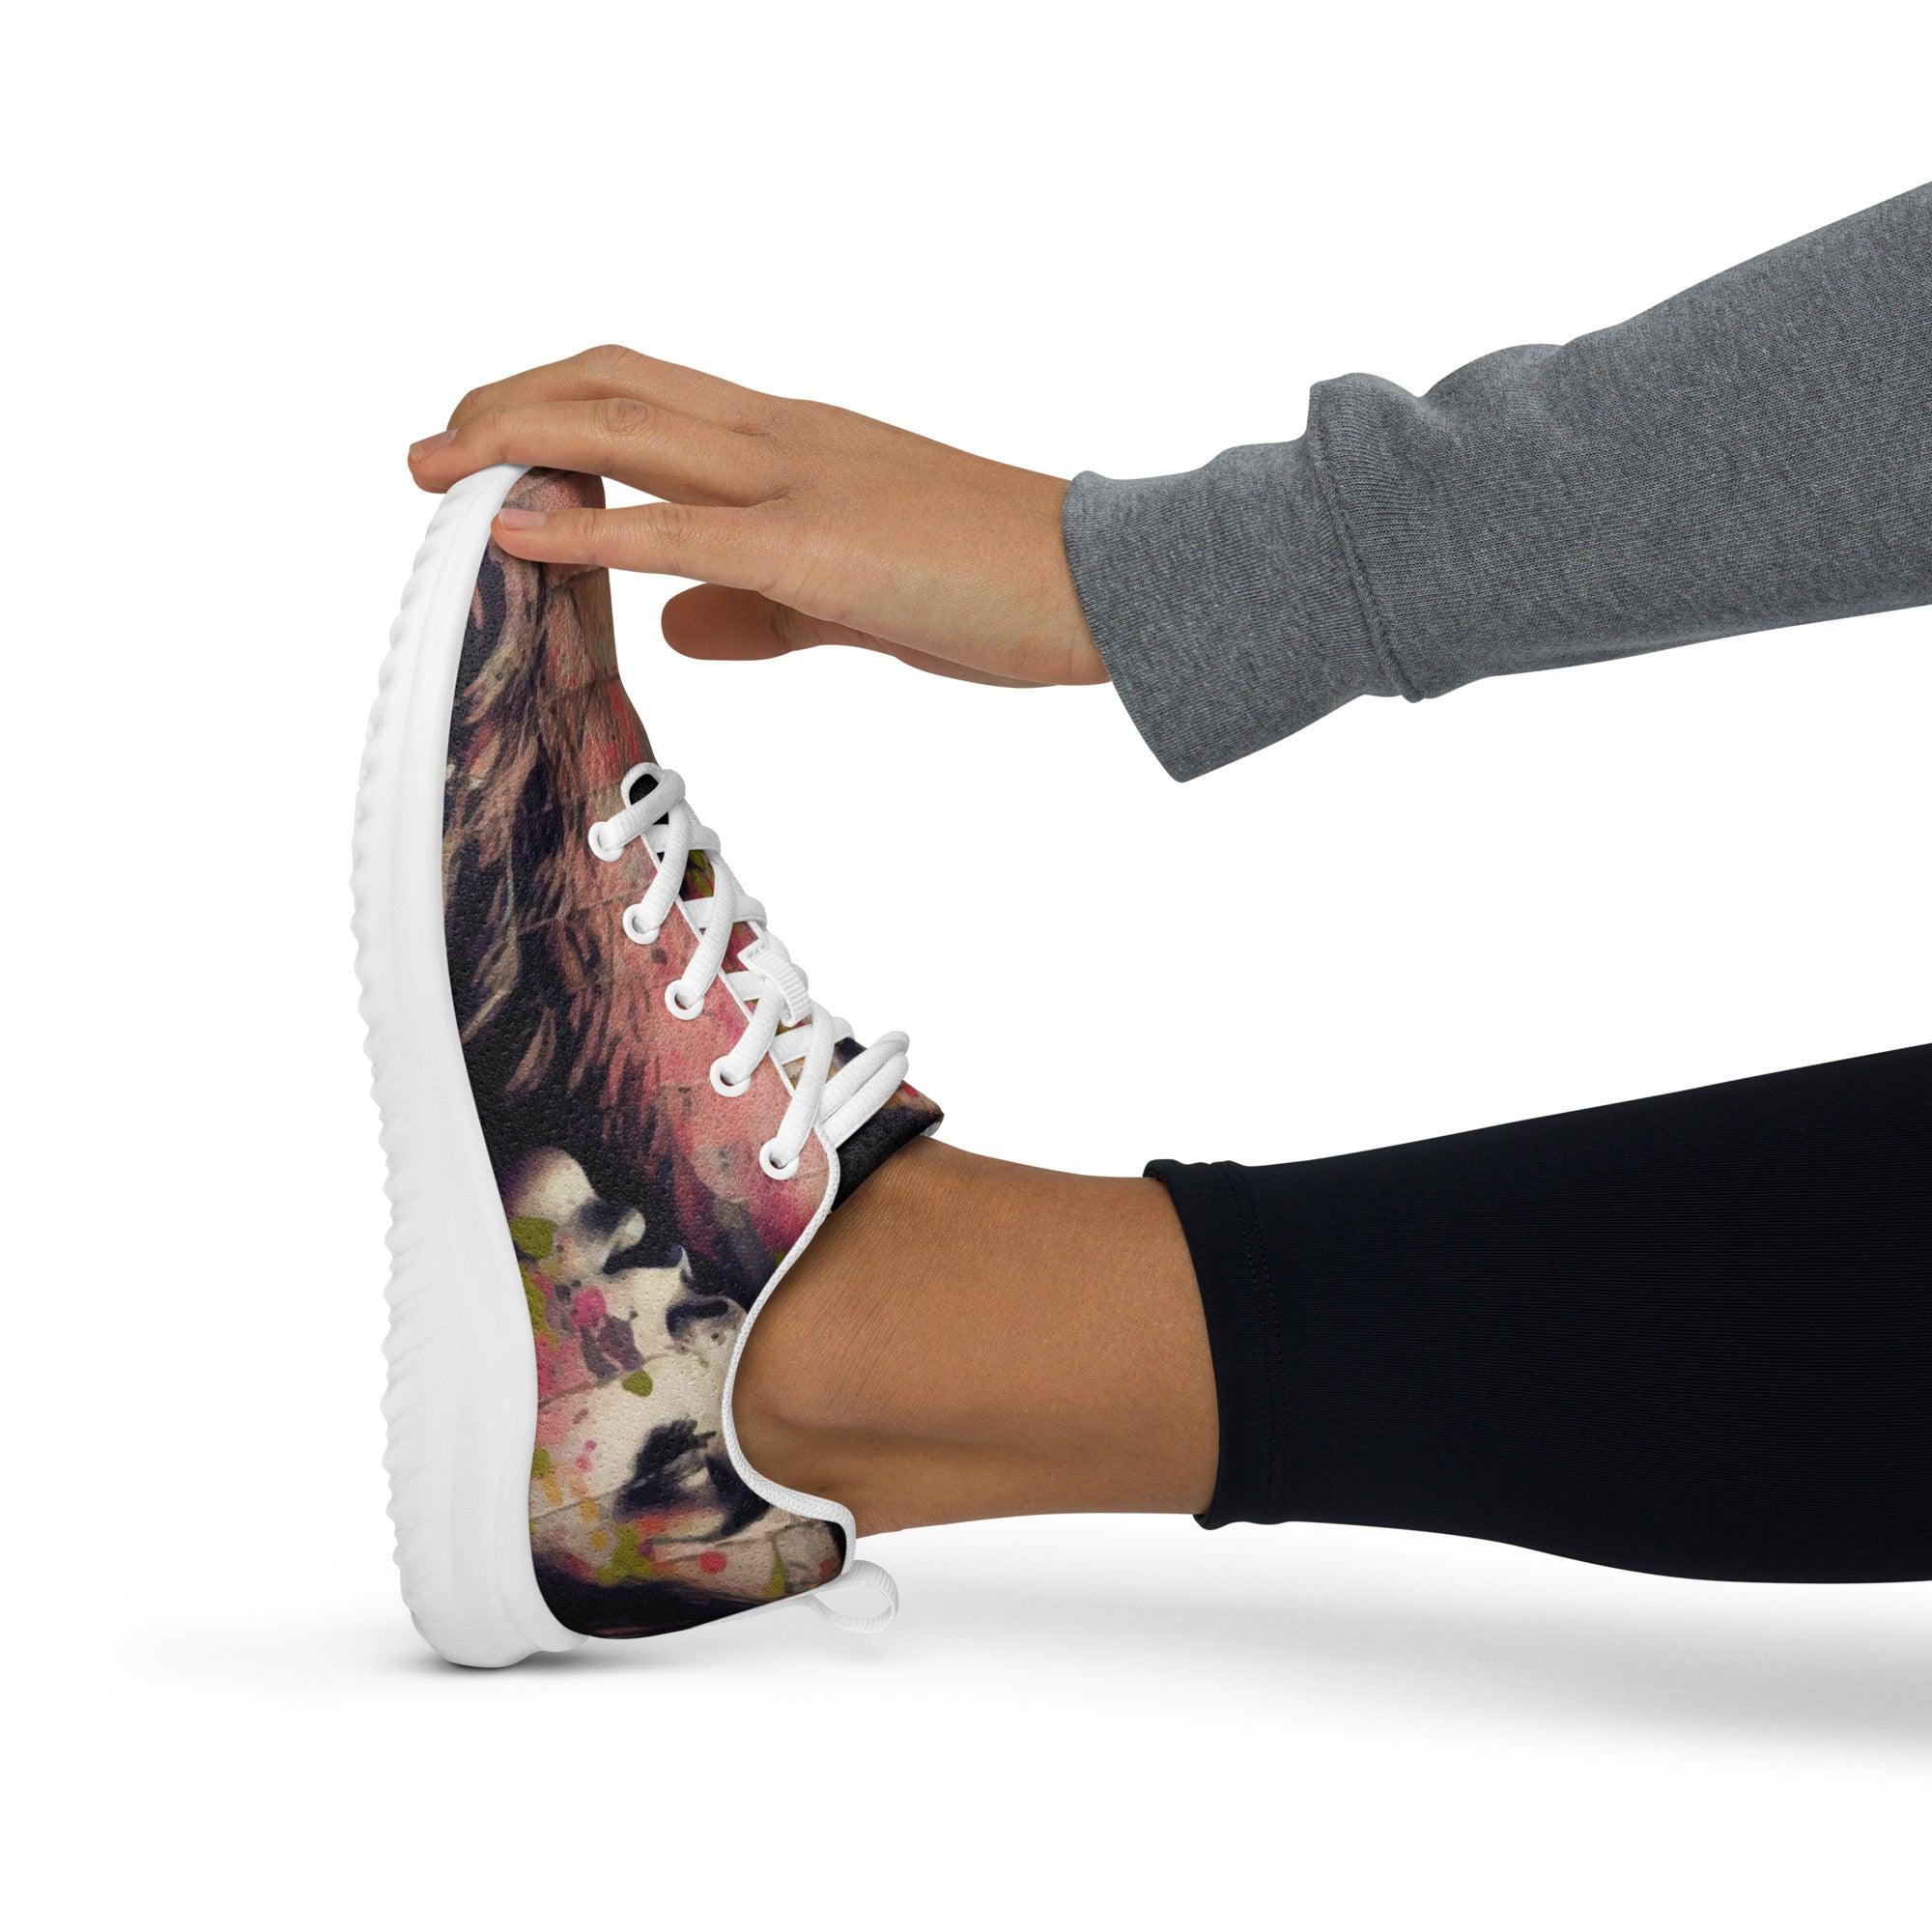 The Saxophone Empowers Her Women’s Athletic Shoes - Beyond T-shirts